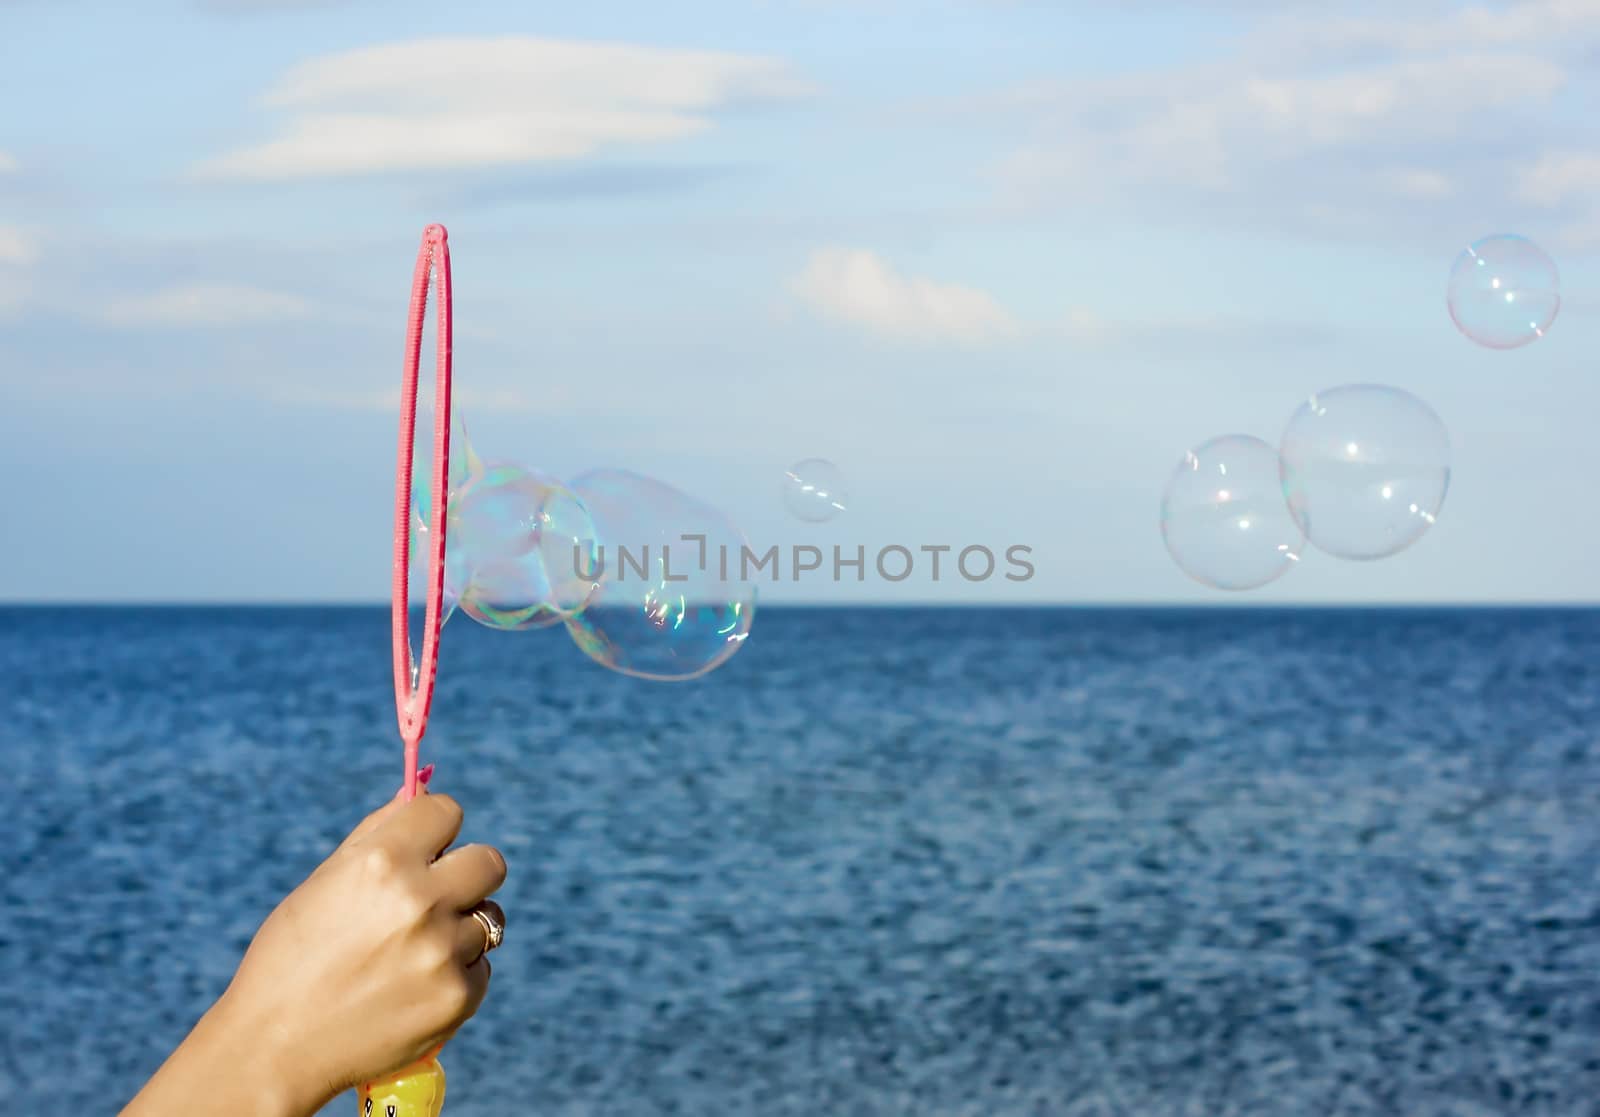 Colorful Soap Bubbles Against Blue Sky Background. For your commercial and editorial use.